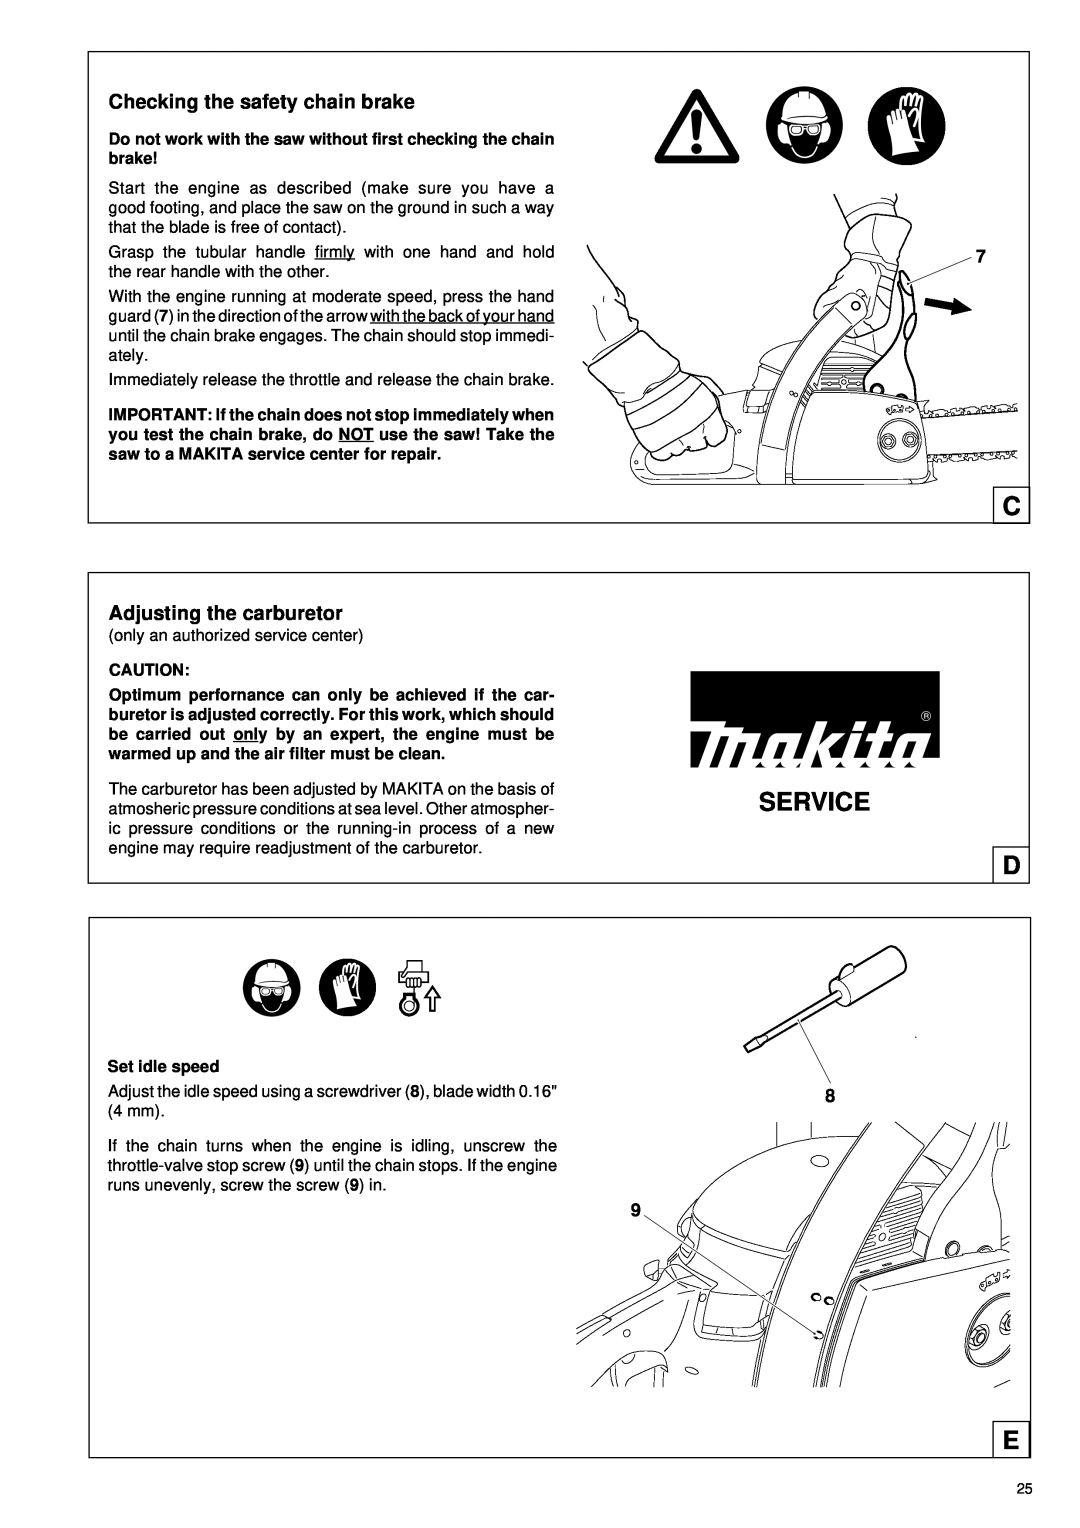 Makita DCS34 manual Service D, Checking the safety chain brake, Adjusting the carburetor, Set idle speed 